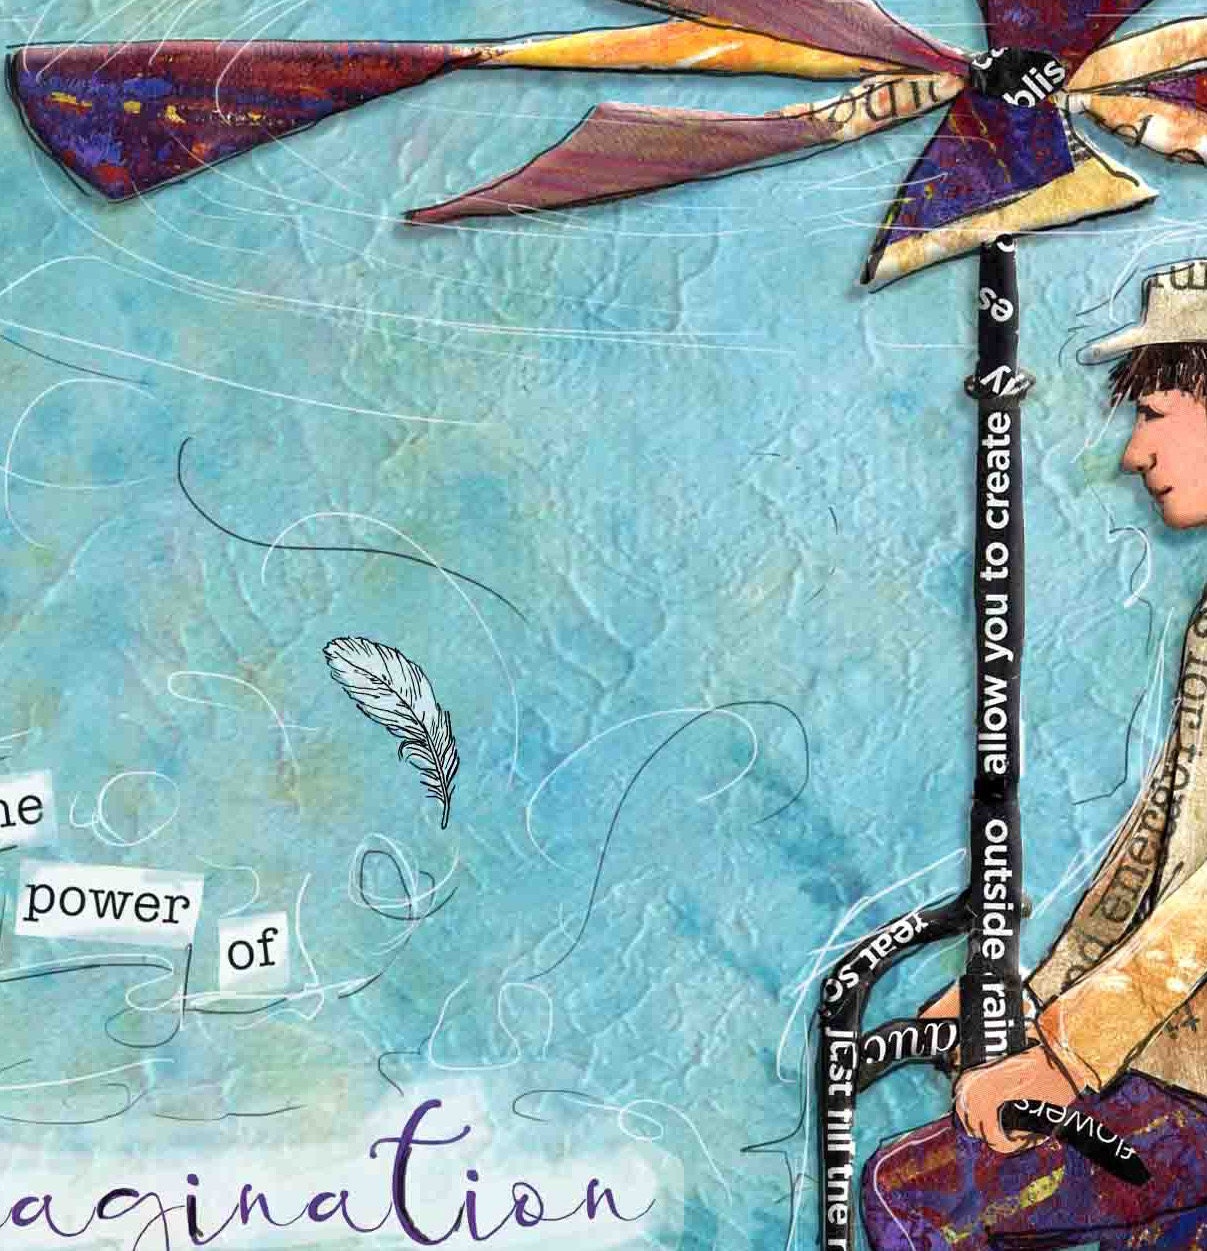 Greeting Card of a Paper Collage of a Person Riding a Flying Machine with John Muir Imagination Quote - Inspirational - Blank Inside